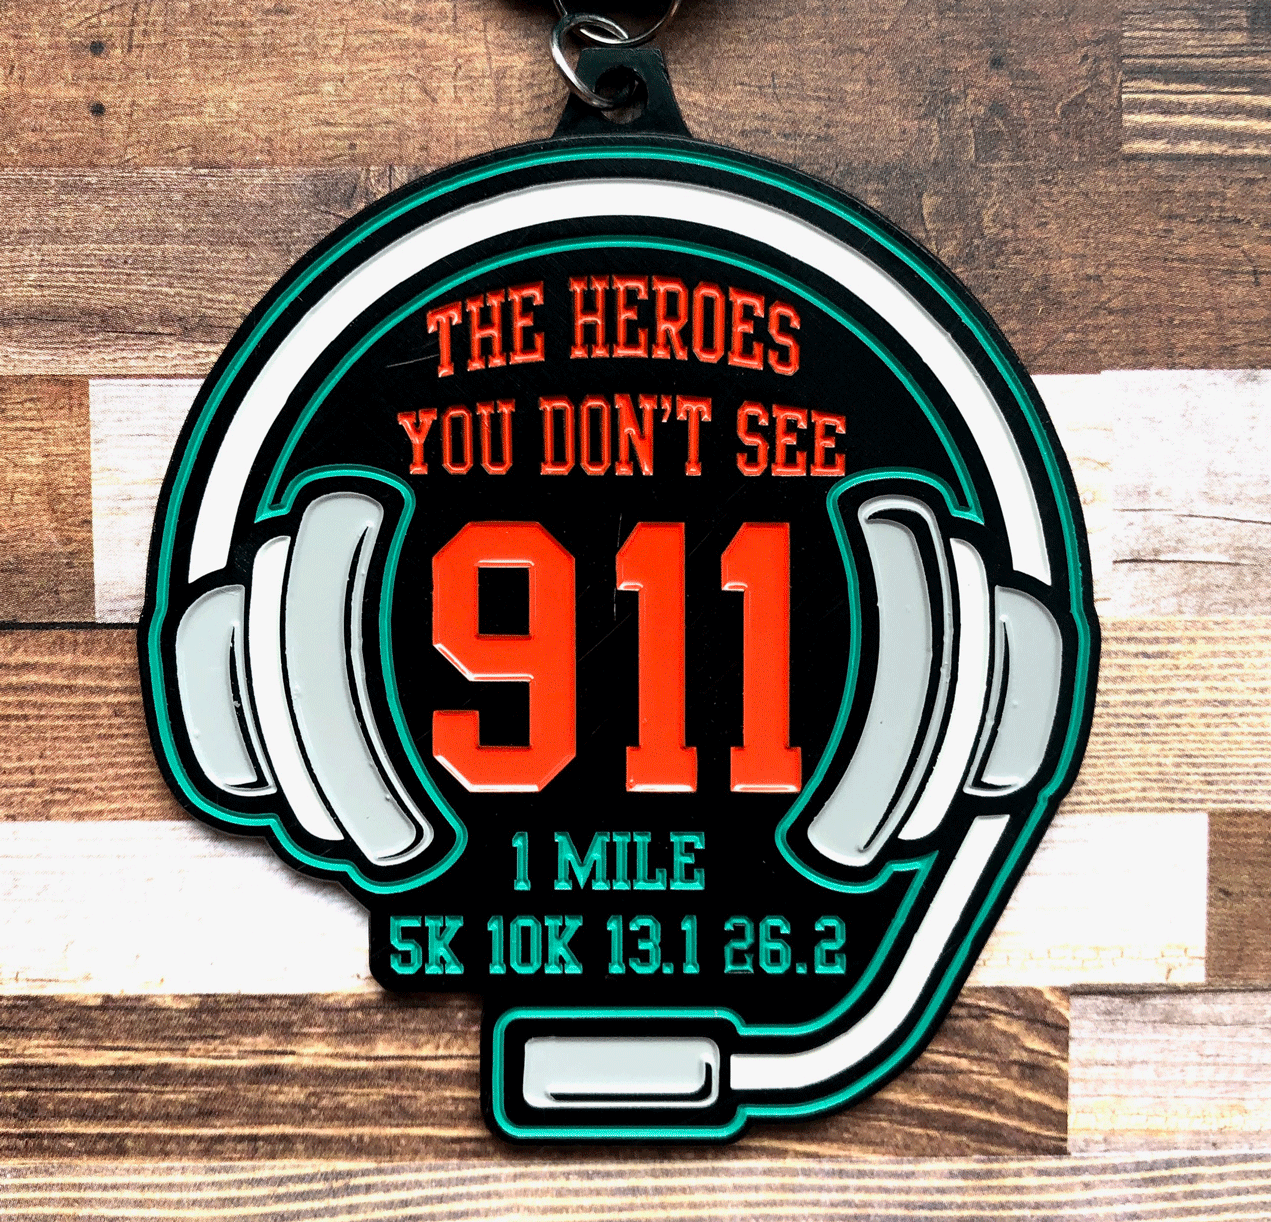 Only $9! The Heroes You Don't See 1 M 5K 10K 13.1 26.2 -Cincinnati